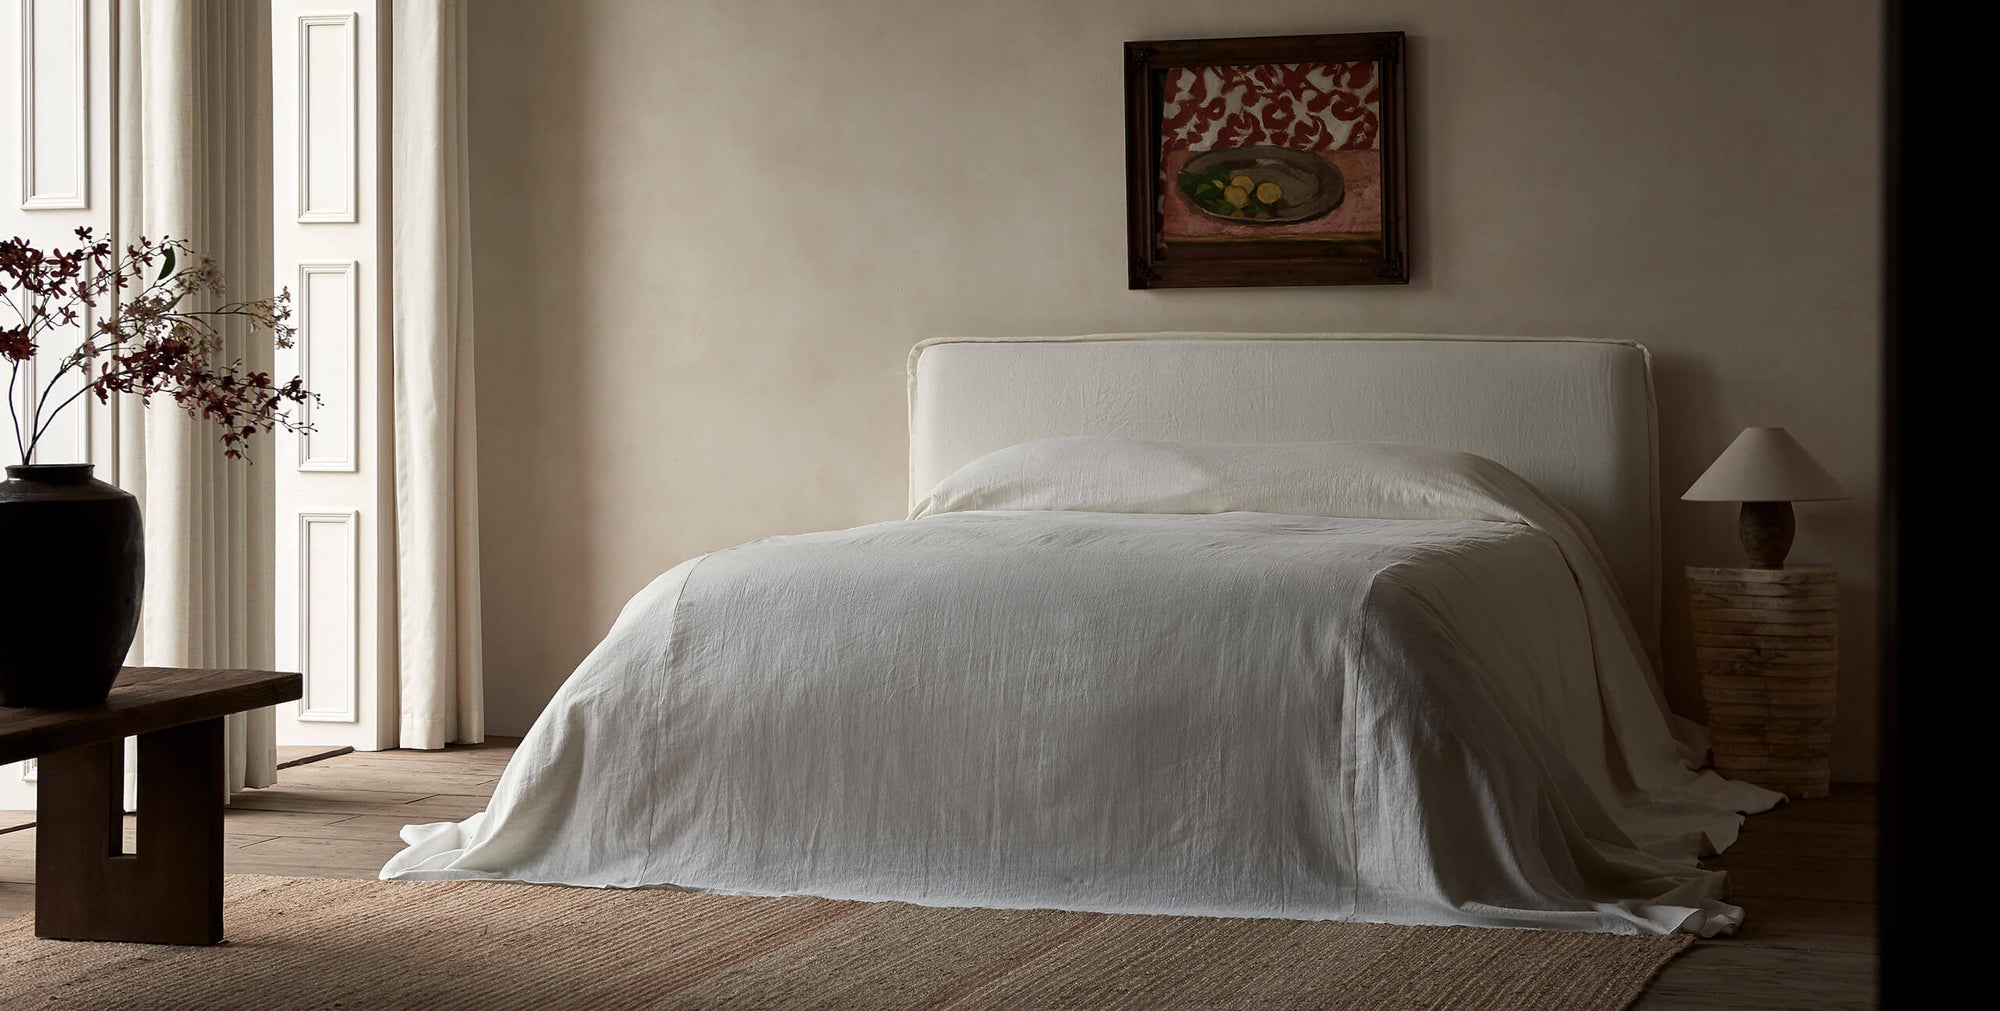 Neva Queen Bed in Water Lily, a white Light Weight Linen with warm undertones, made up with white linen bedding